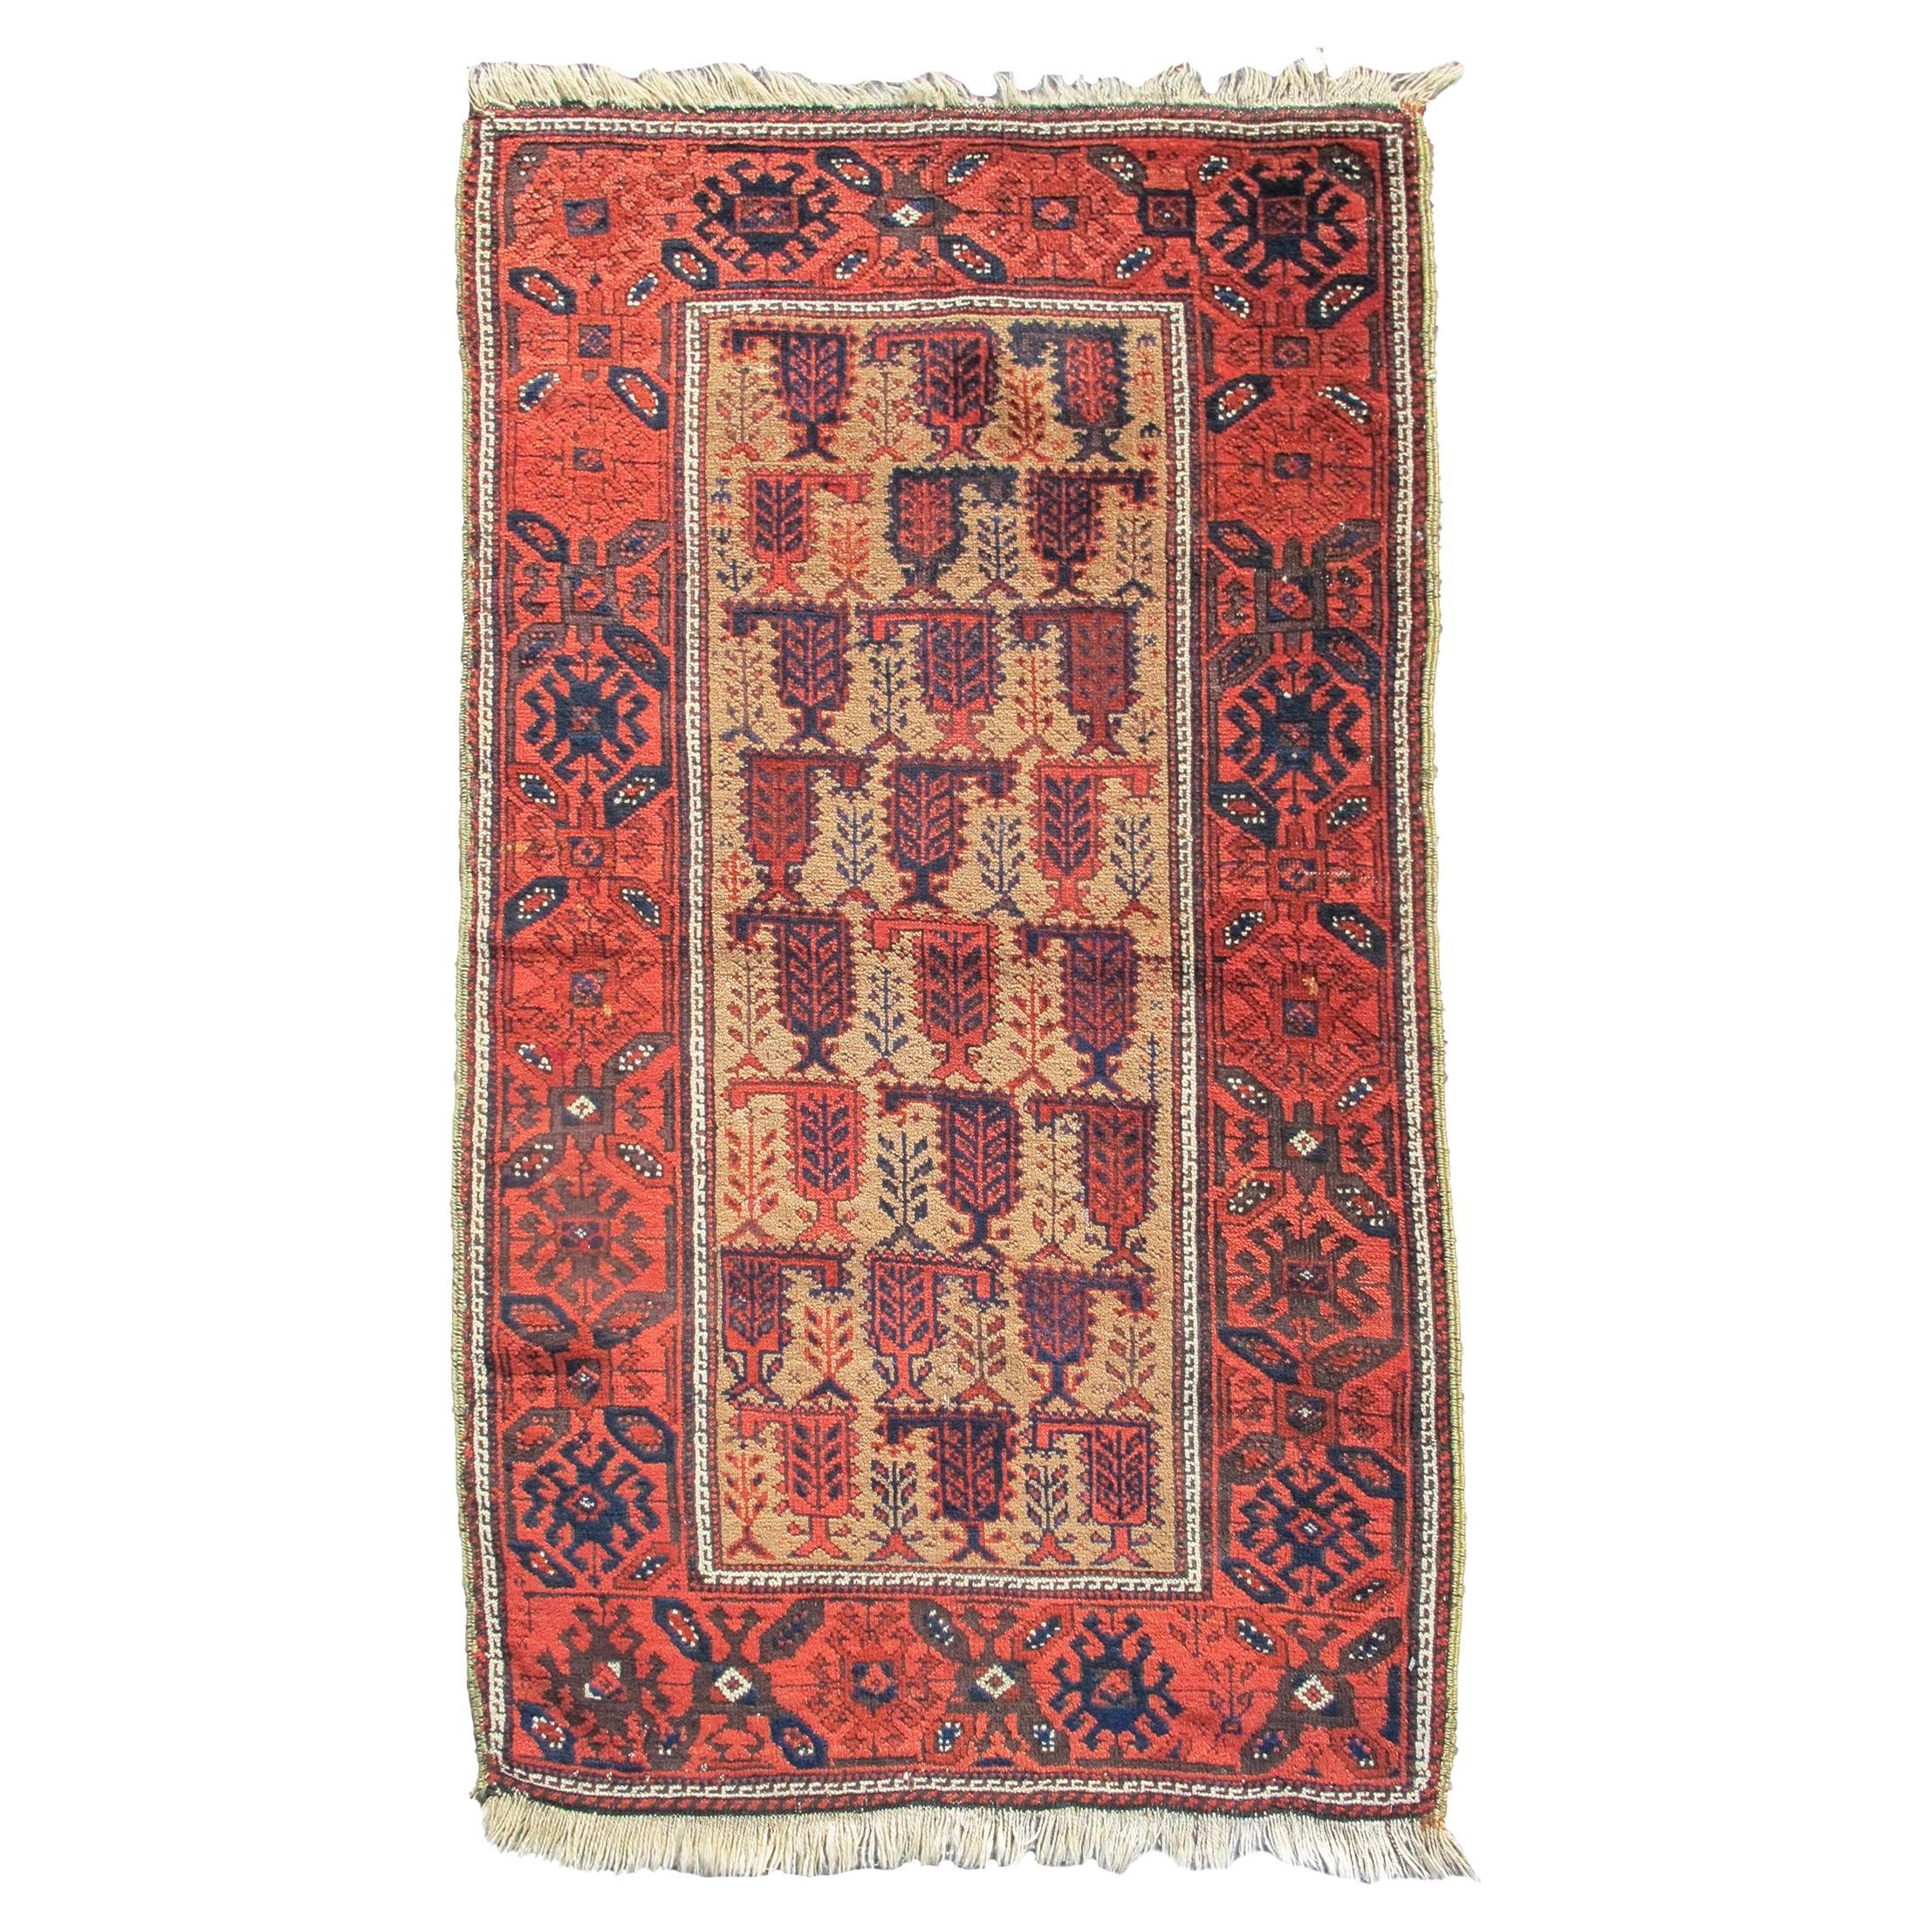 Antique Persian Baluch Rug, Late 19th Century